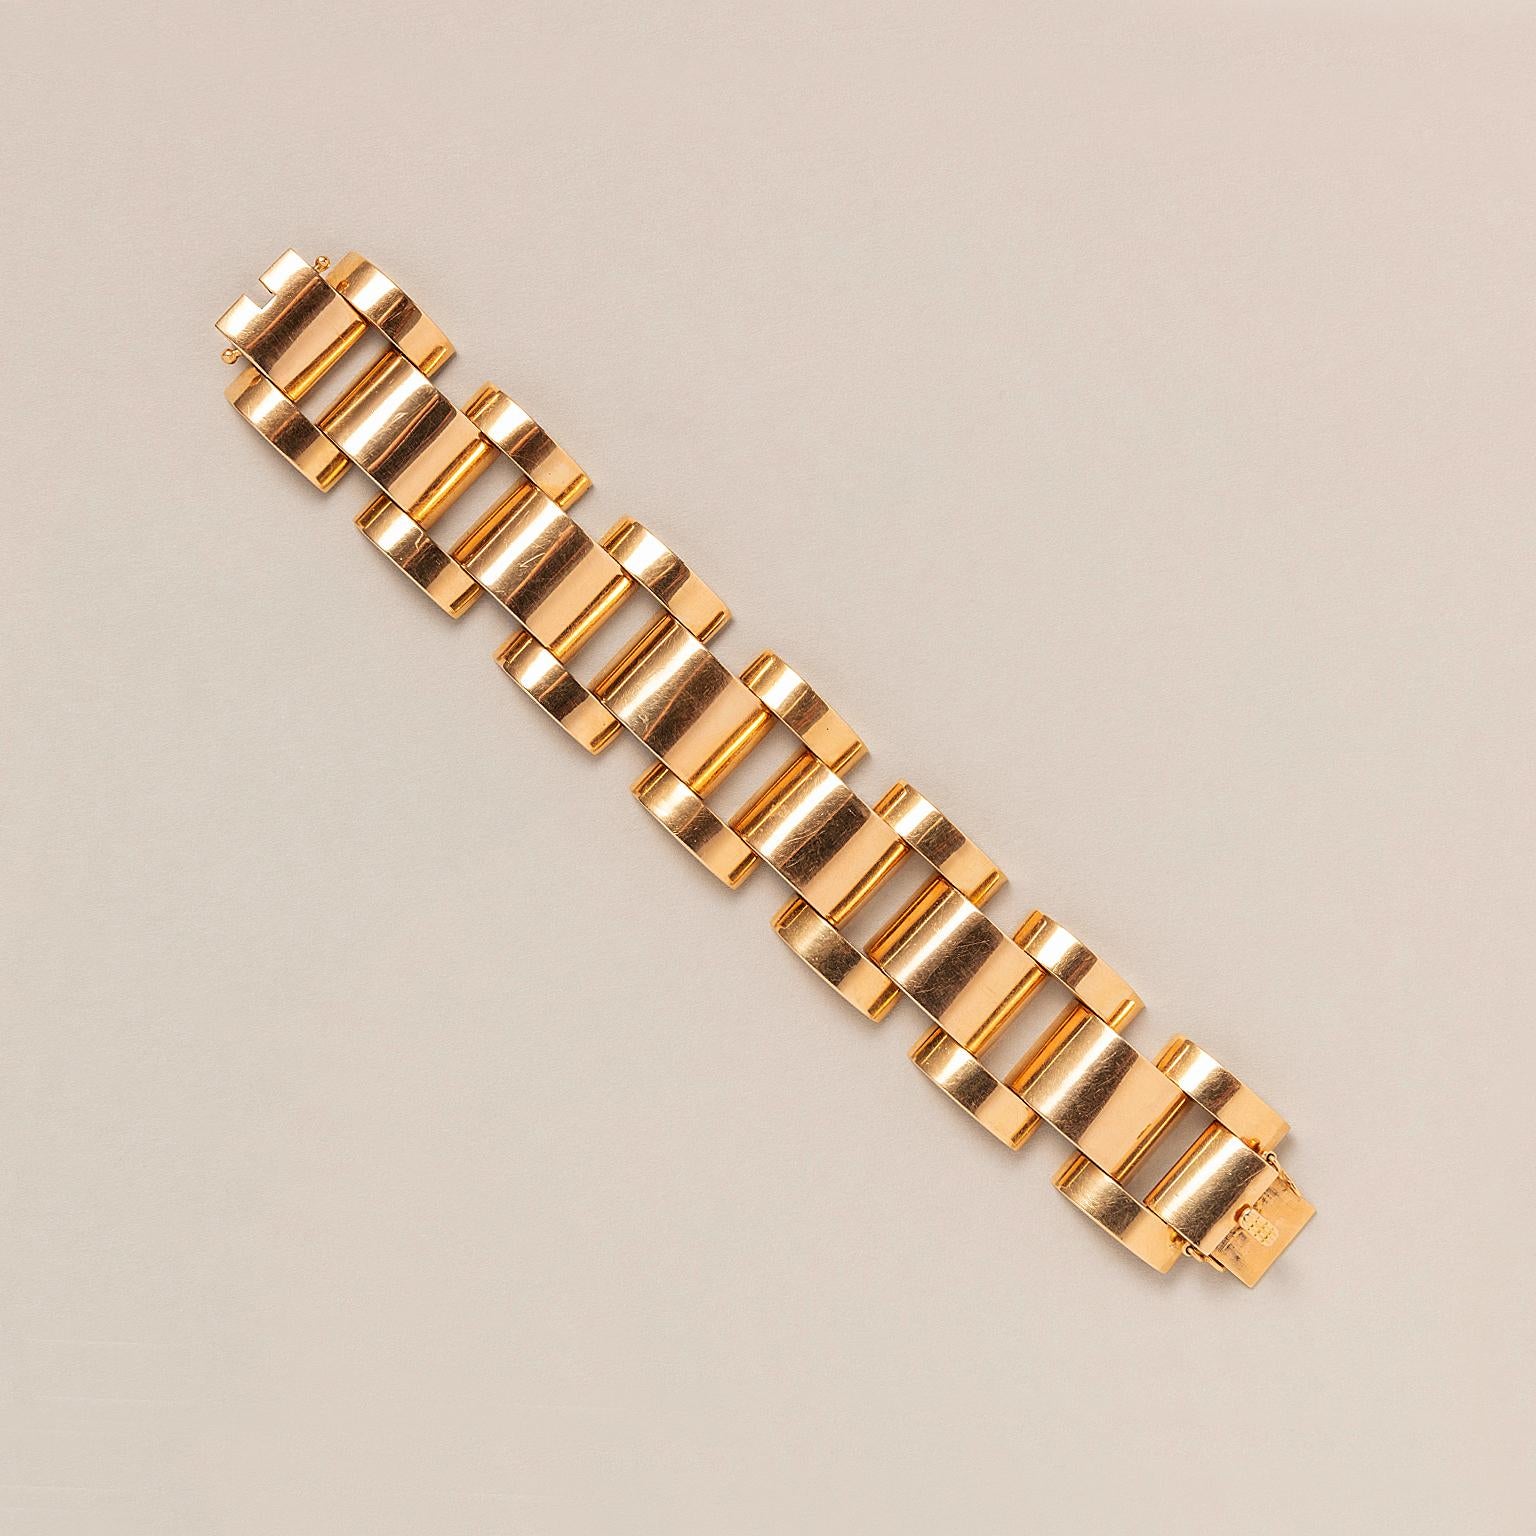 An 18 carat warm yellow gold tank bracelet with convex shapes with an invisible box lock and two safety clasps.
Period: Retro

Weight: 101 grams 
Length: 20 cm fits a medium to large wrist
Width: 3 cm